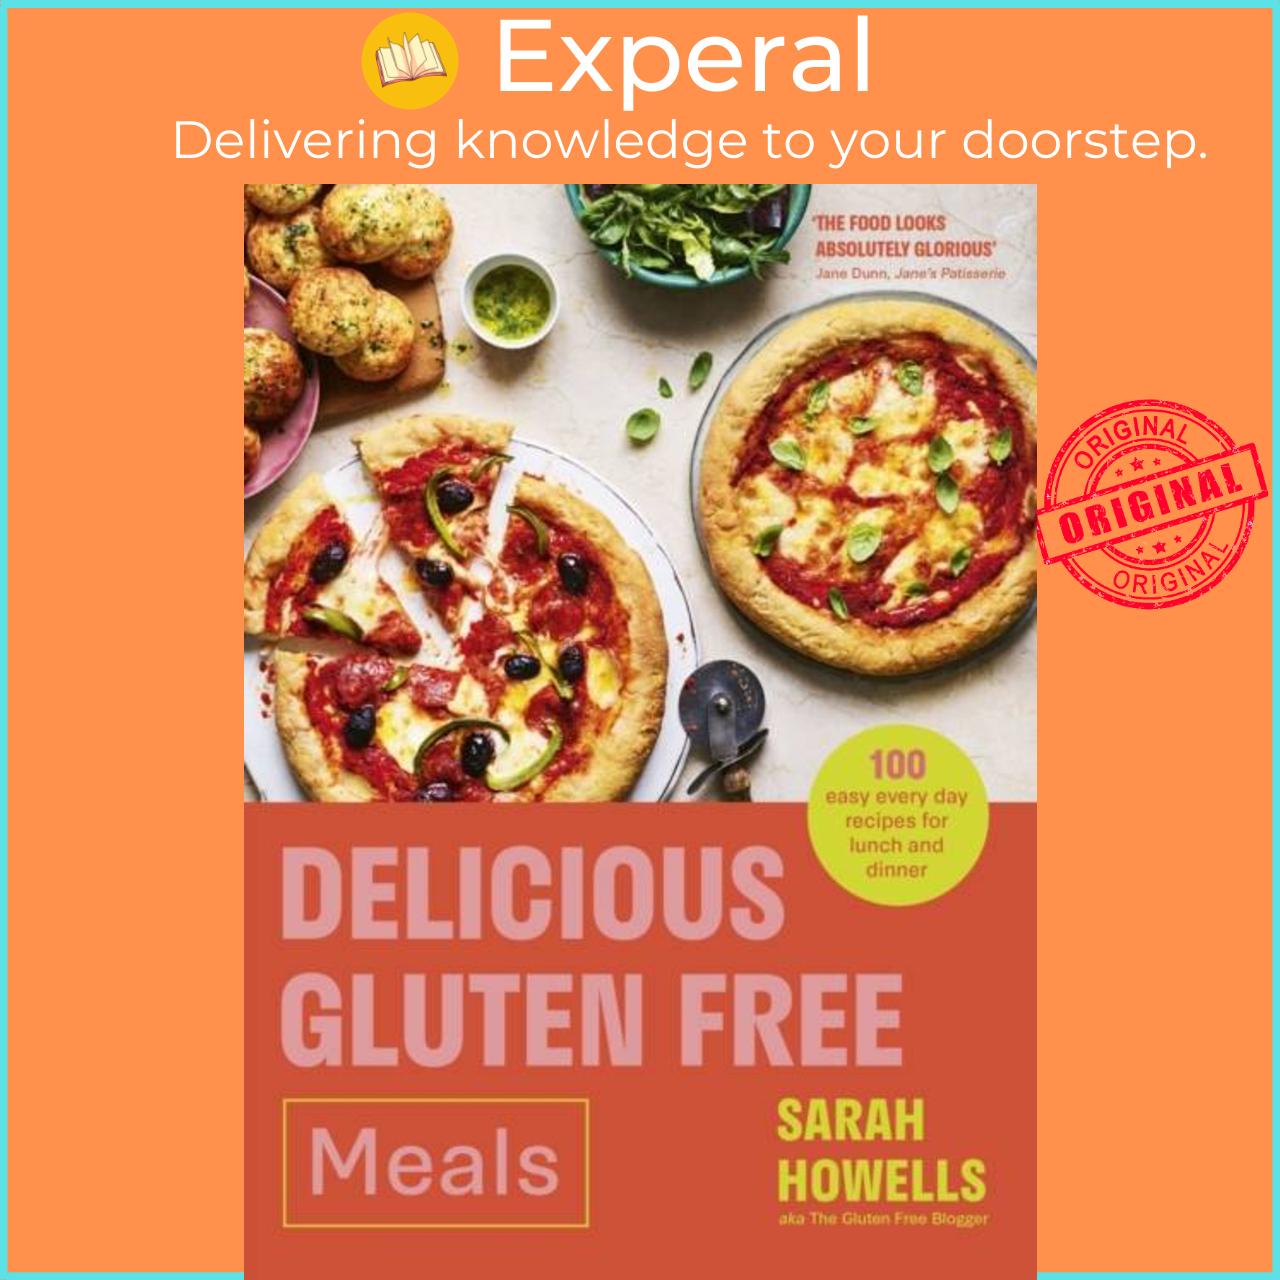 Sách - Delicious Gluten Free Meals - 100 easy every day recipes for lunch and d by Sarah Howells (UK edition, hardcover)